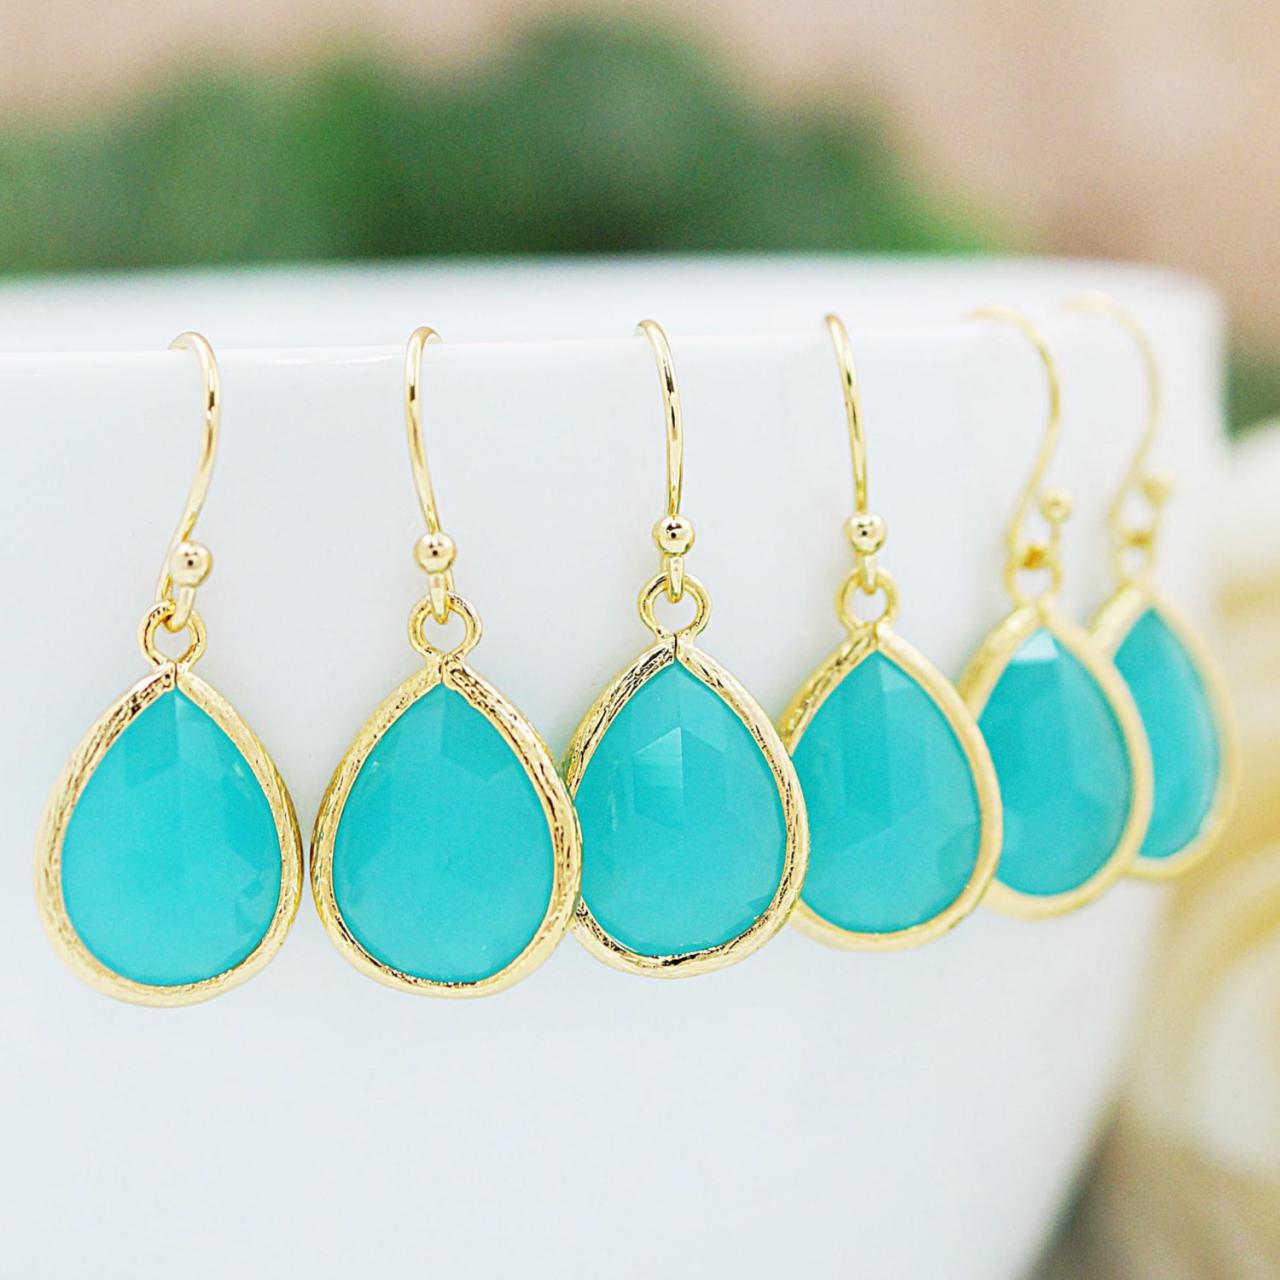 Bridesmaid gifts Bridesmaid Earrings Wedding gift Mint Opal Glass drops dangle earrings Everyday gift for her Christmas gift under 20